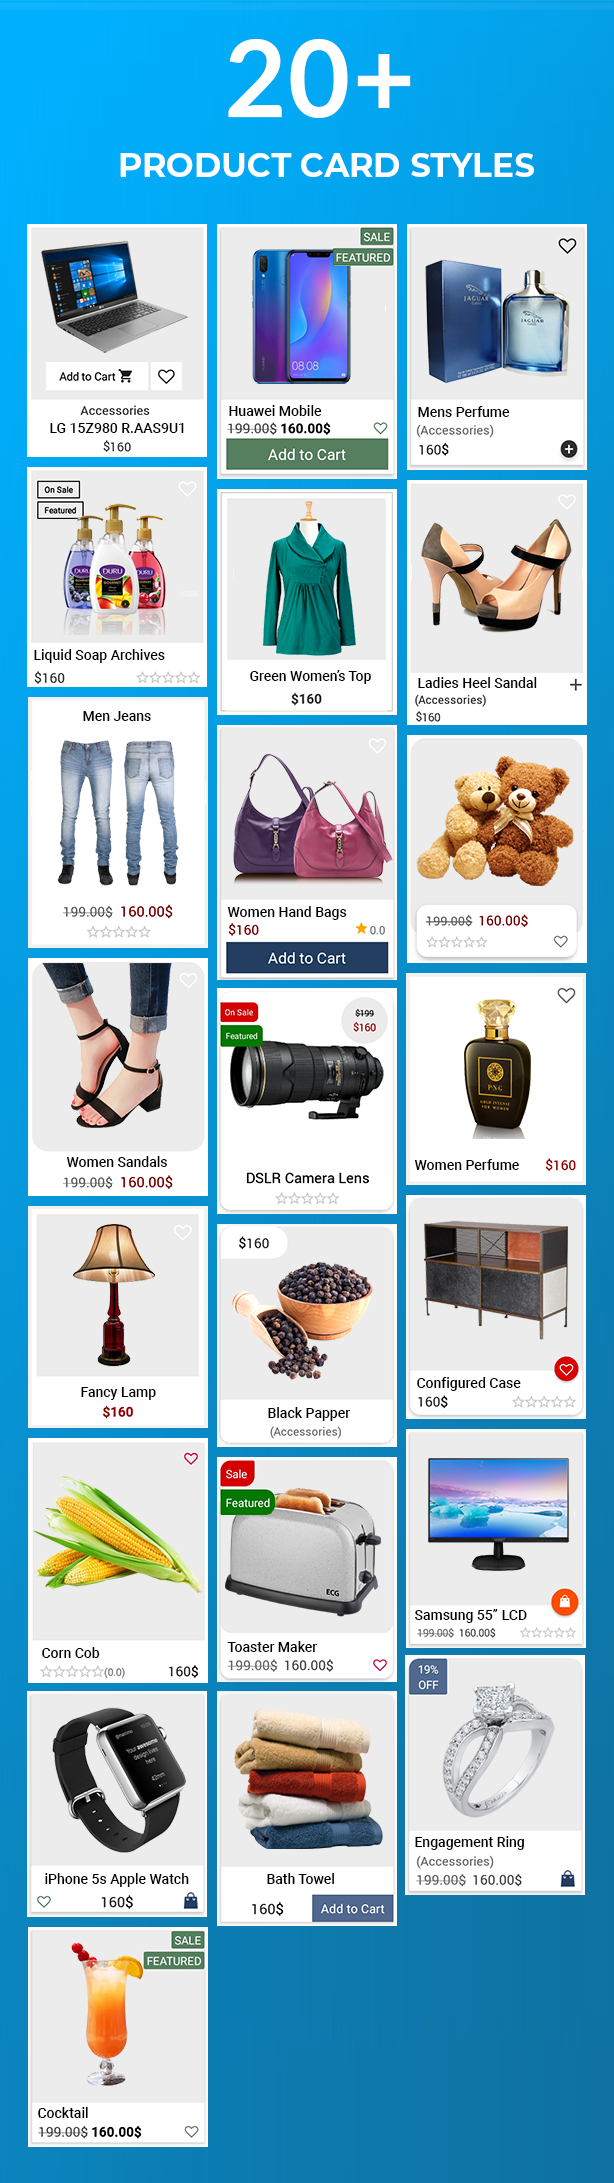 React Ecommerce - Universal iOS & Android Ecommerce / Store Full Mobile App with PHP Laravel CMS - 8